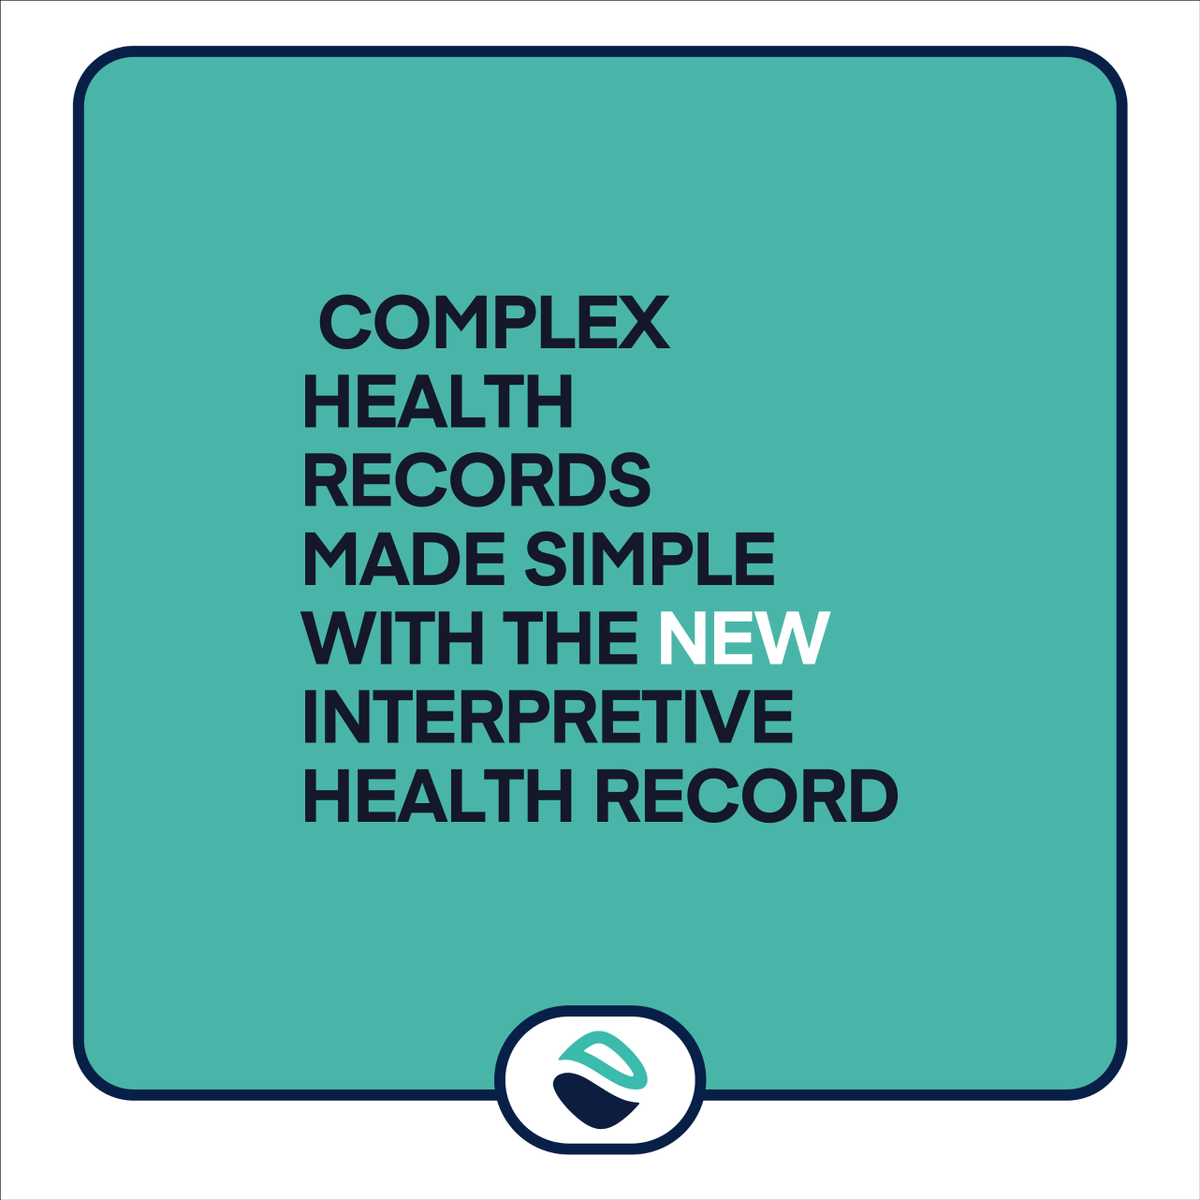 Taming tangled medical histories with a streamlined, insightful #healthrecord that connects the dots in healthcare data. It's our #InterpretiveHealthRecord that simplifies your #clinicworkflow and workday. 

Tour Eva! 🔗 in bio

#EMR #EHR #doctor #nursepractitioner #FNP #medtech